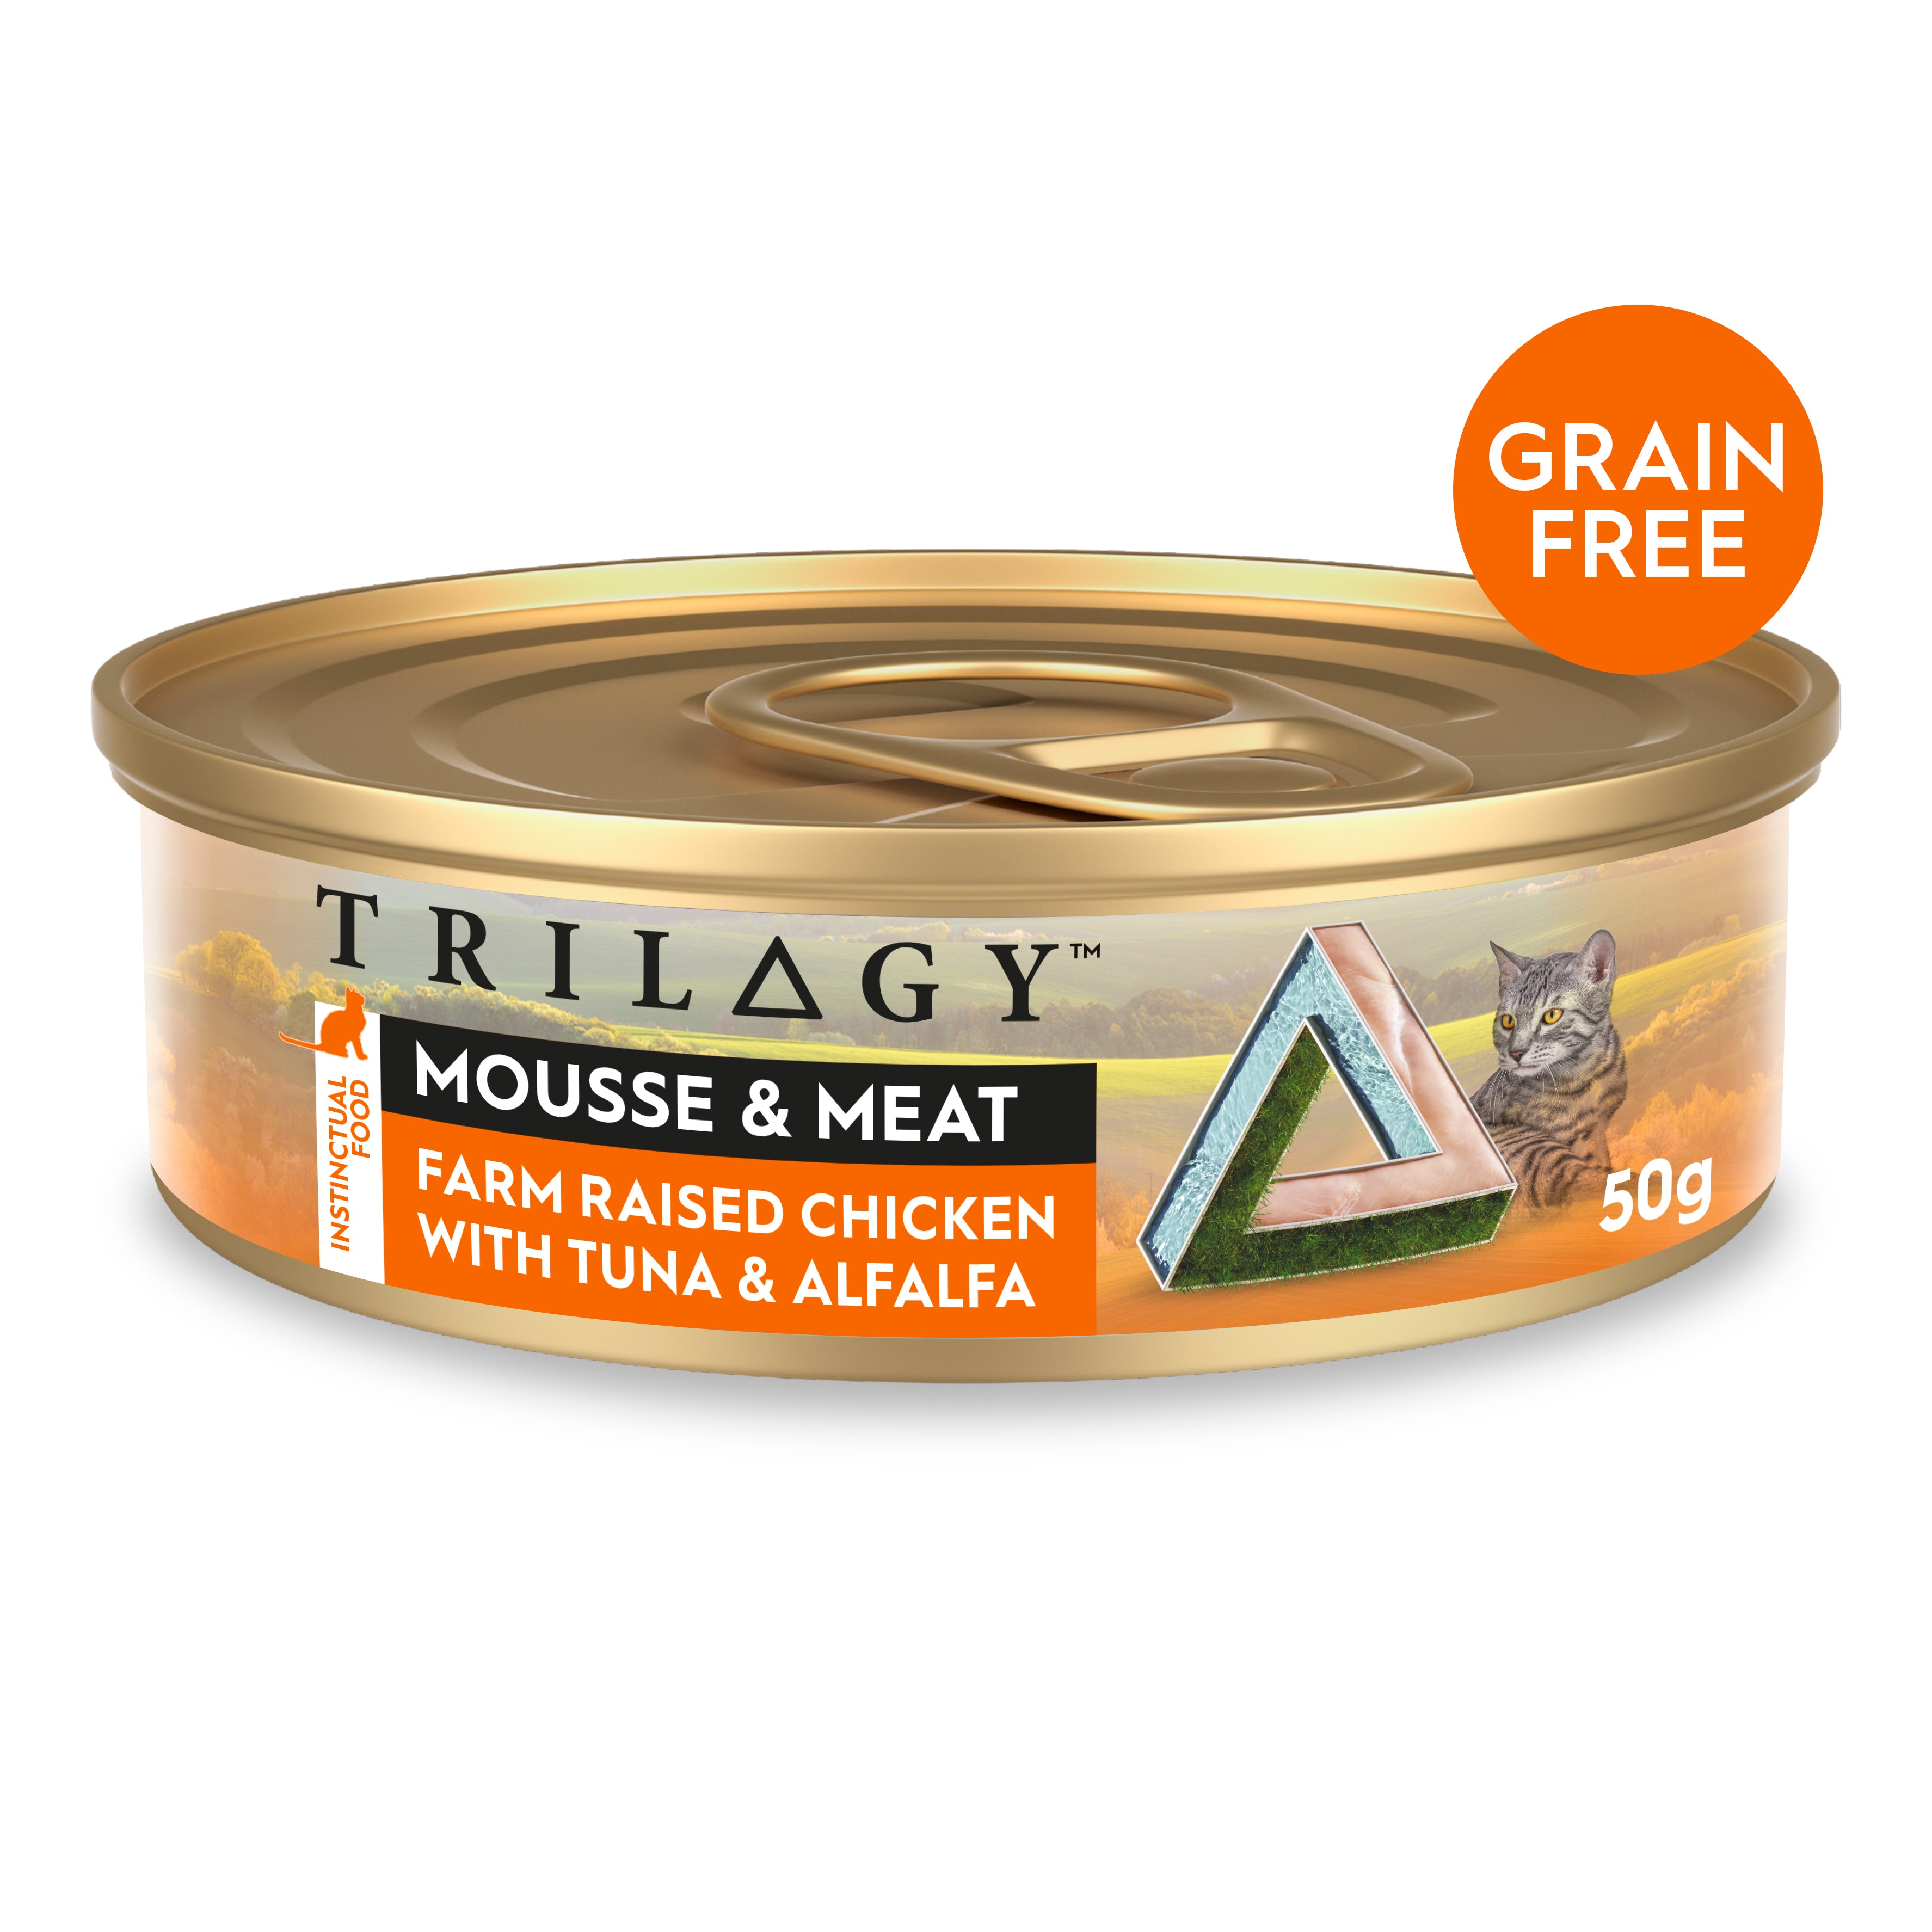 TRILOGY™ MOUSSE & MEAT FARM RAISED CHICKEN WITH TUNA & ALFALFA 50G